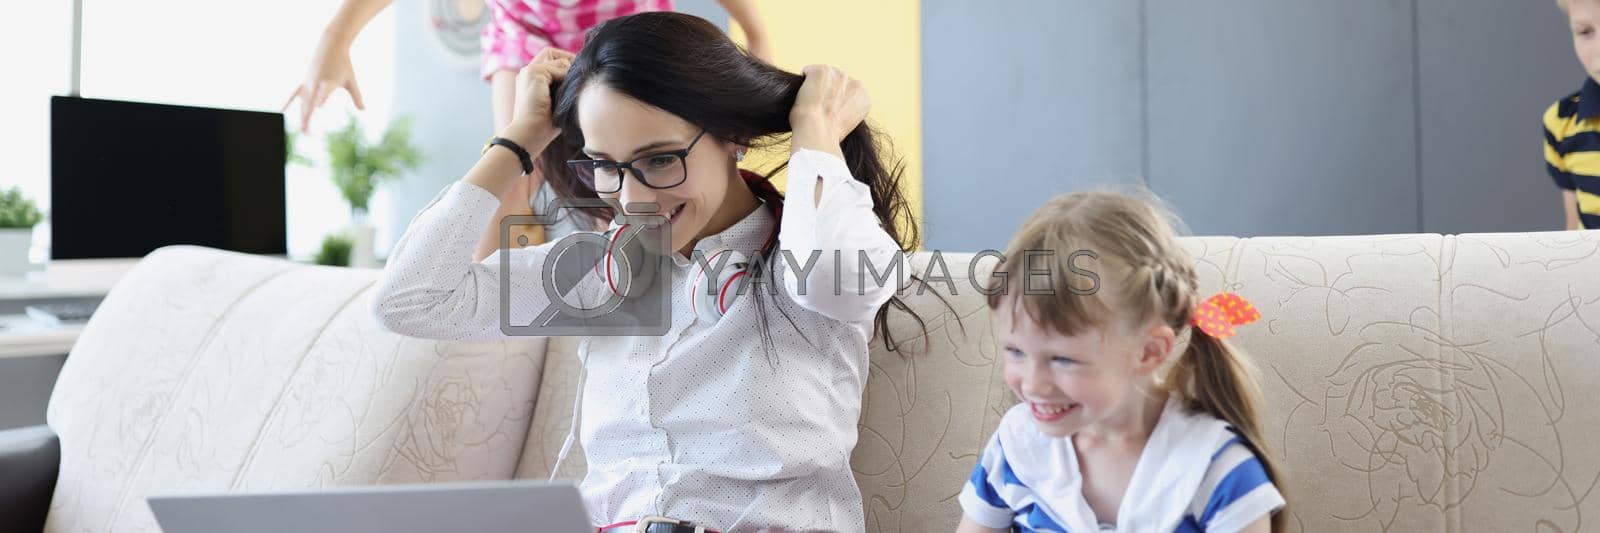 Royalty free image of Happy woman working and playing with her kids on couch by kuprevich